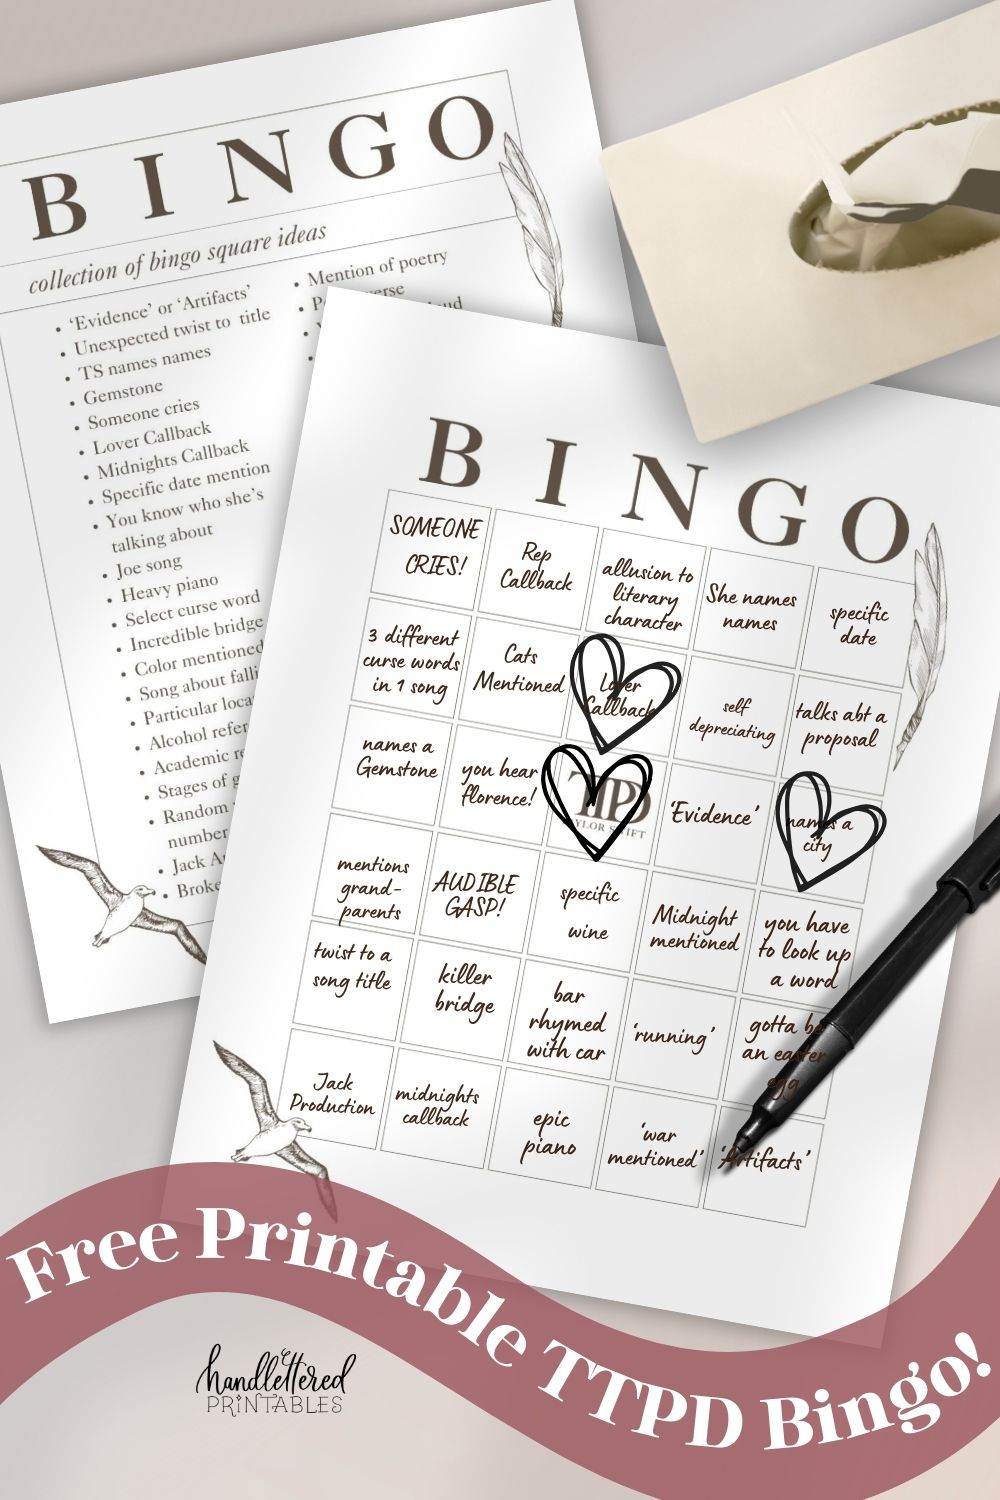 image of taylor swift ttpd themed bingo card full of ideas with a few crossed off with hearts. second page printed is a list of ideas for the bingo cards. both sheets of paper are shown on a light table with a glass of wine and box of tissues. text over reads: free printable TTPD bingo